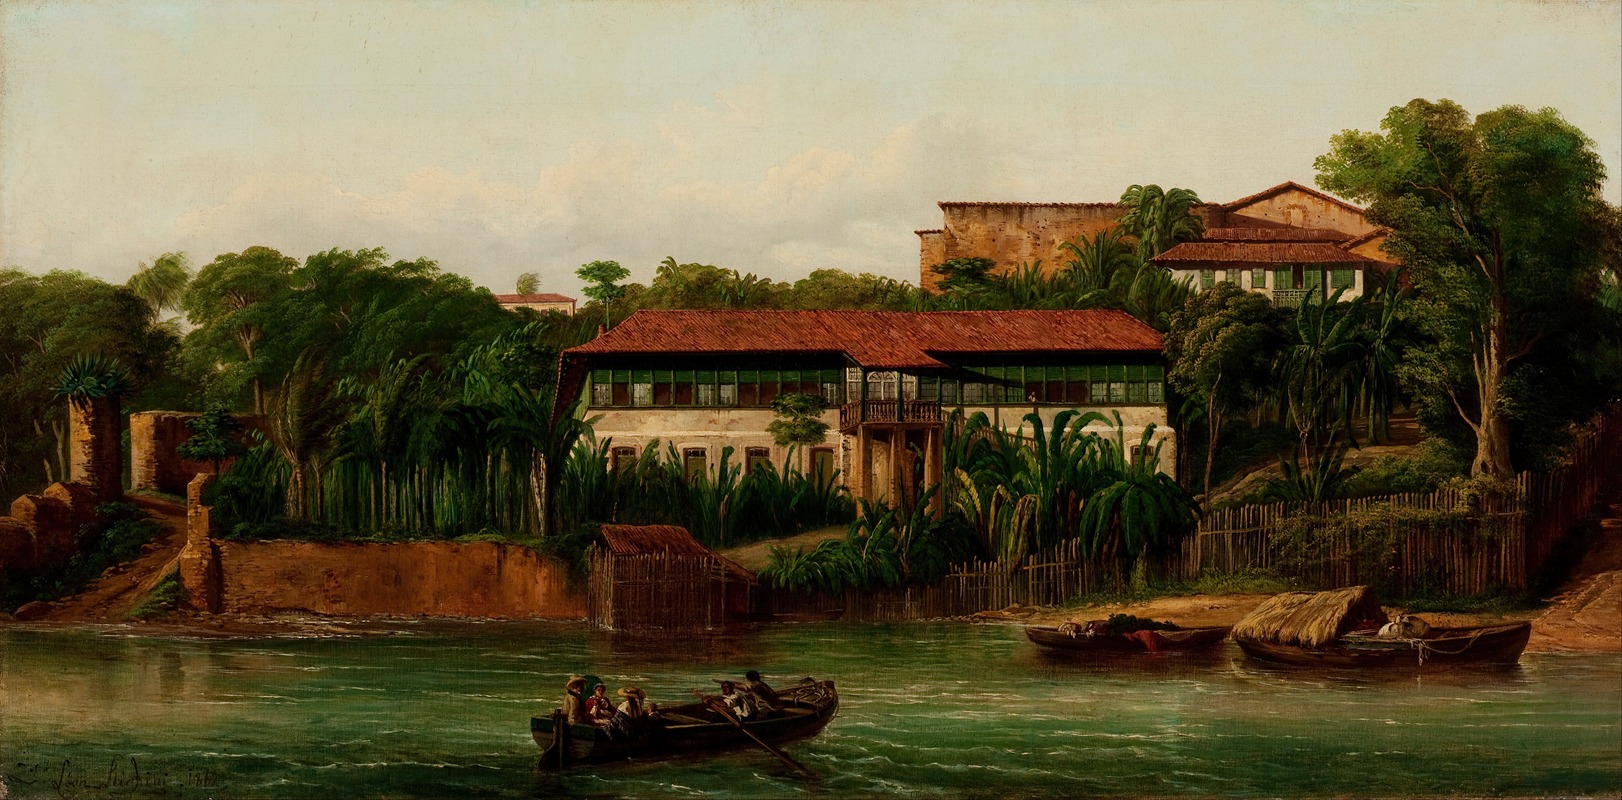 Joseph Léon Righini - Residence on the Banks of the Anil River